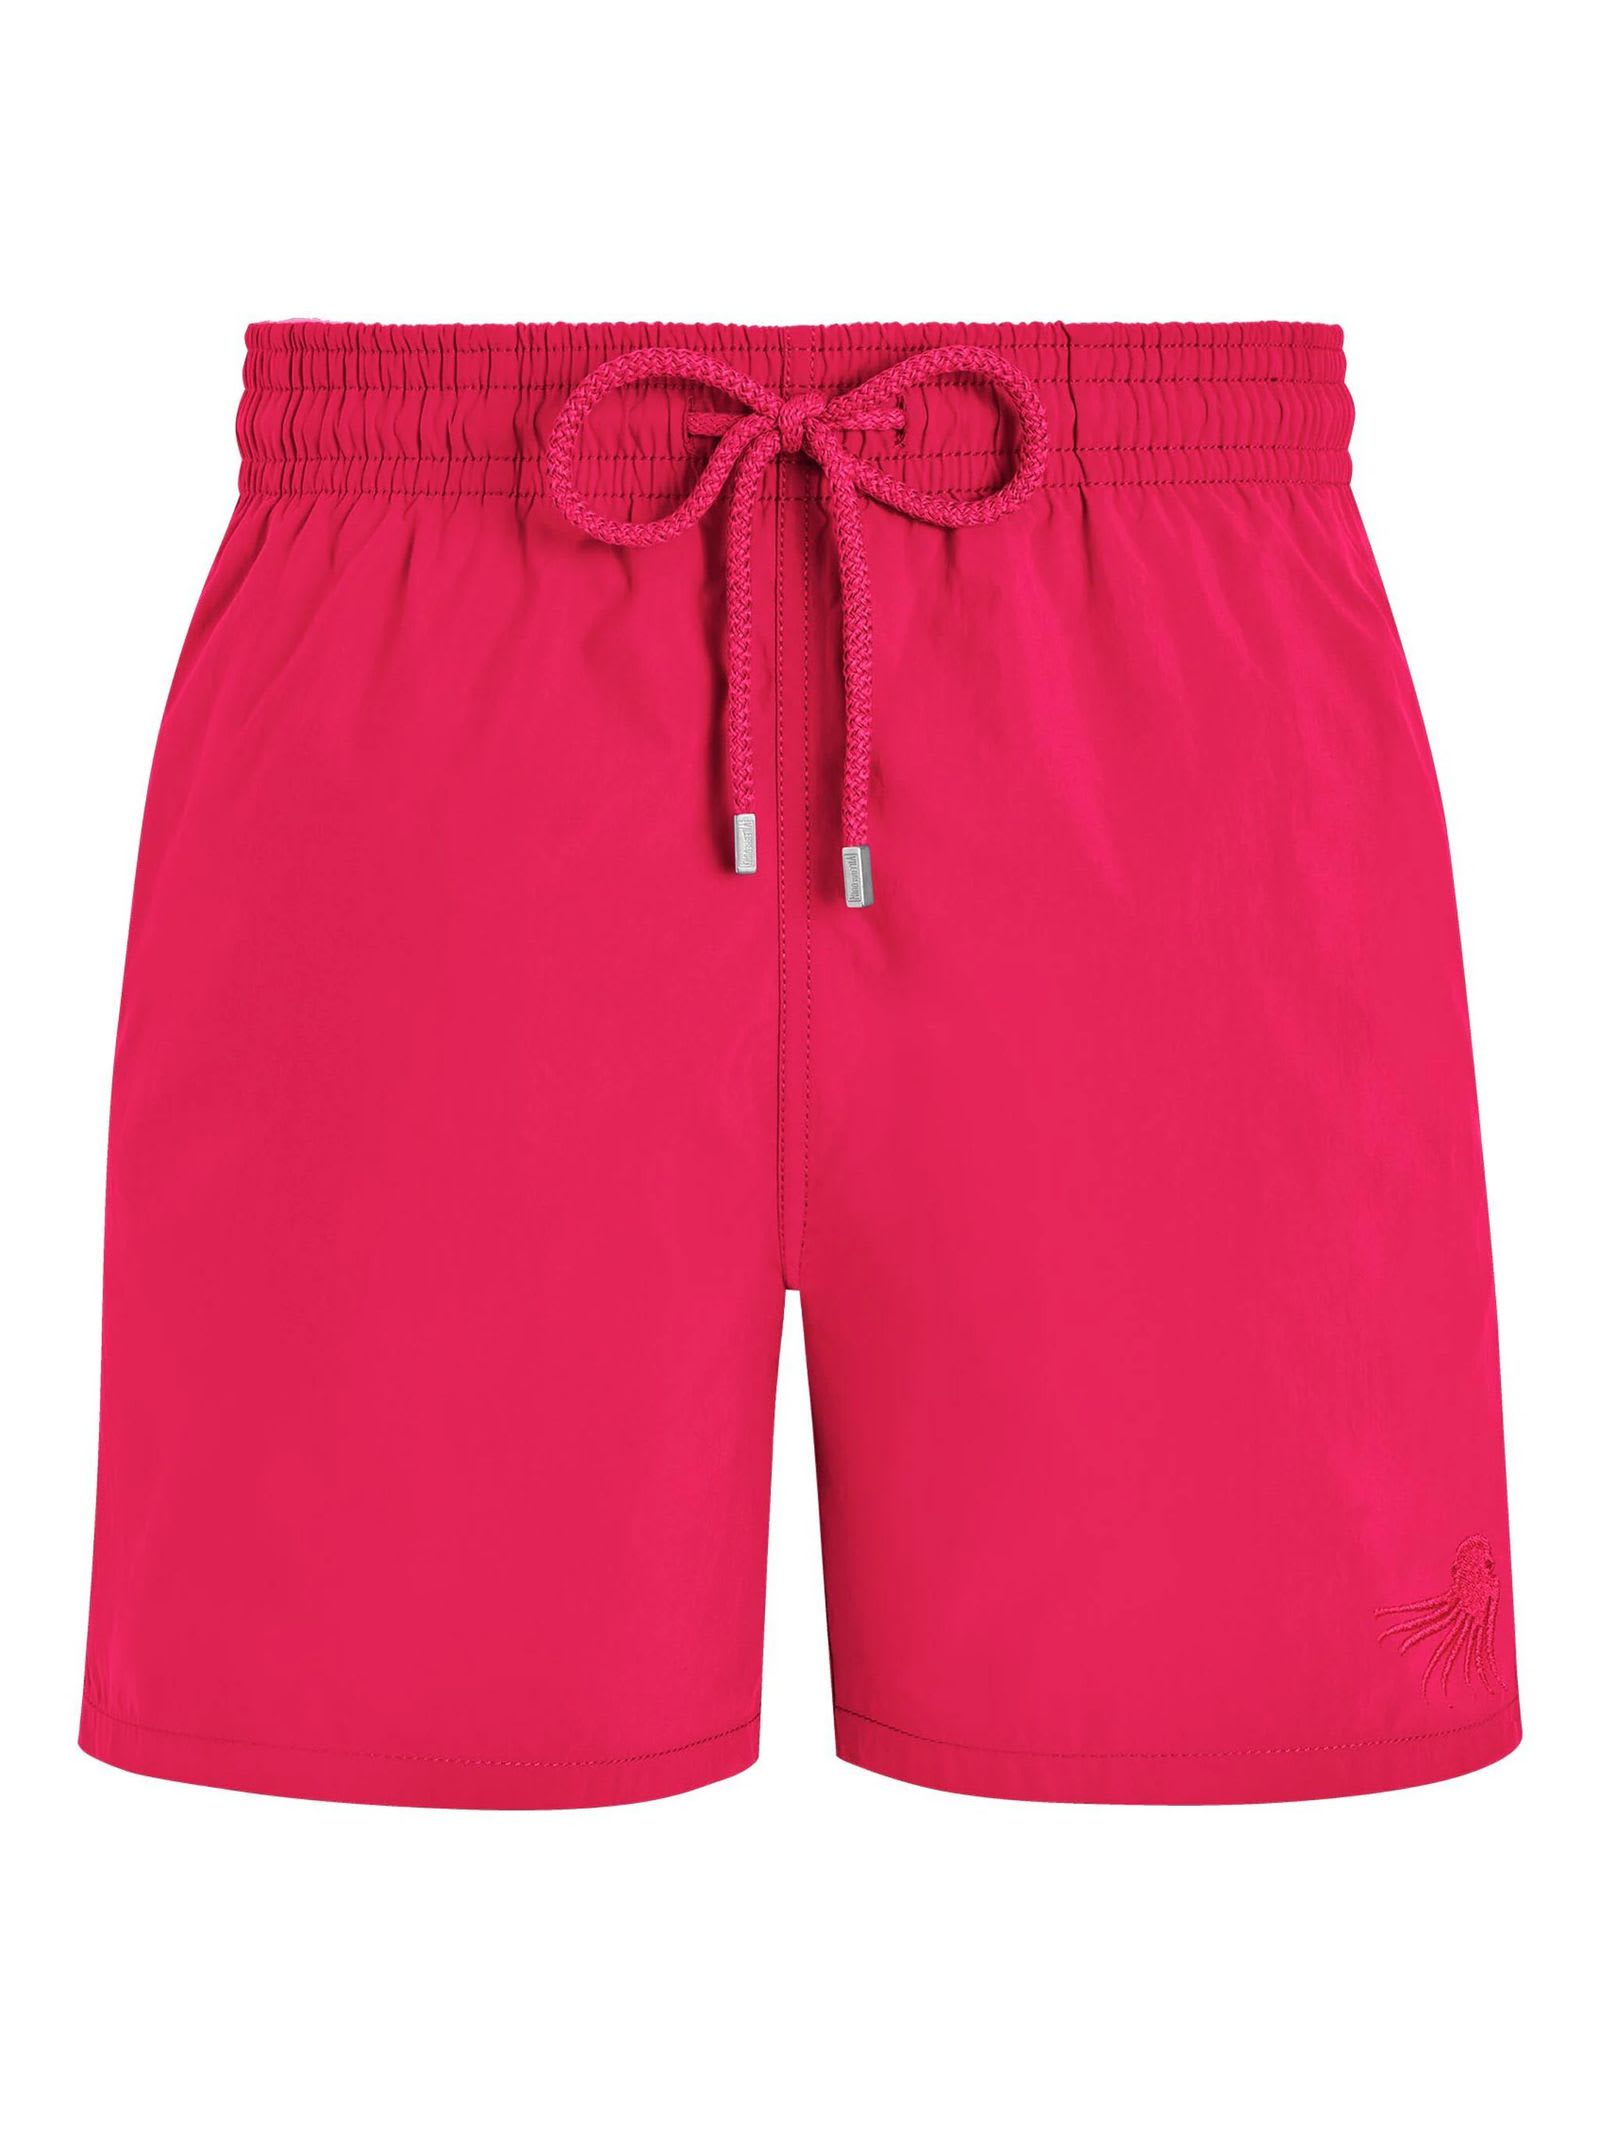 Sea Clothing Red